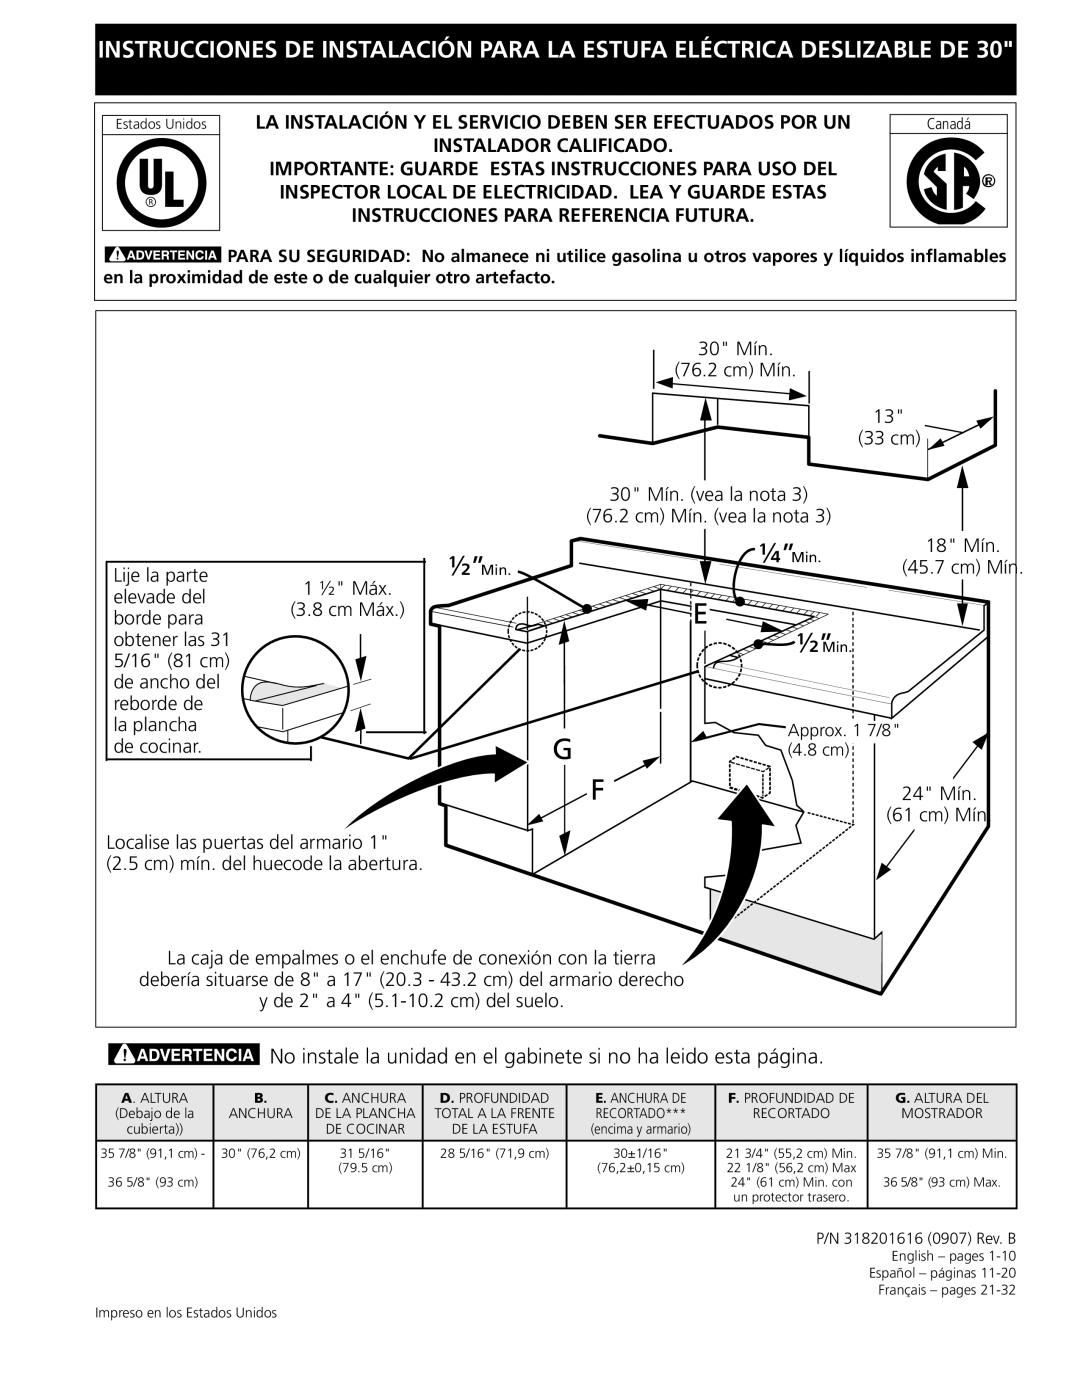 Frigidaire 318201616 installation instructions Approx 7/8, Canadá 